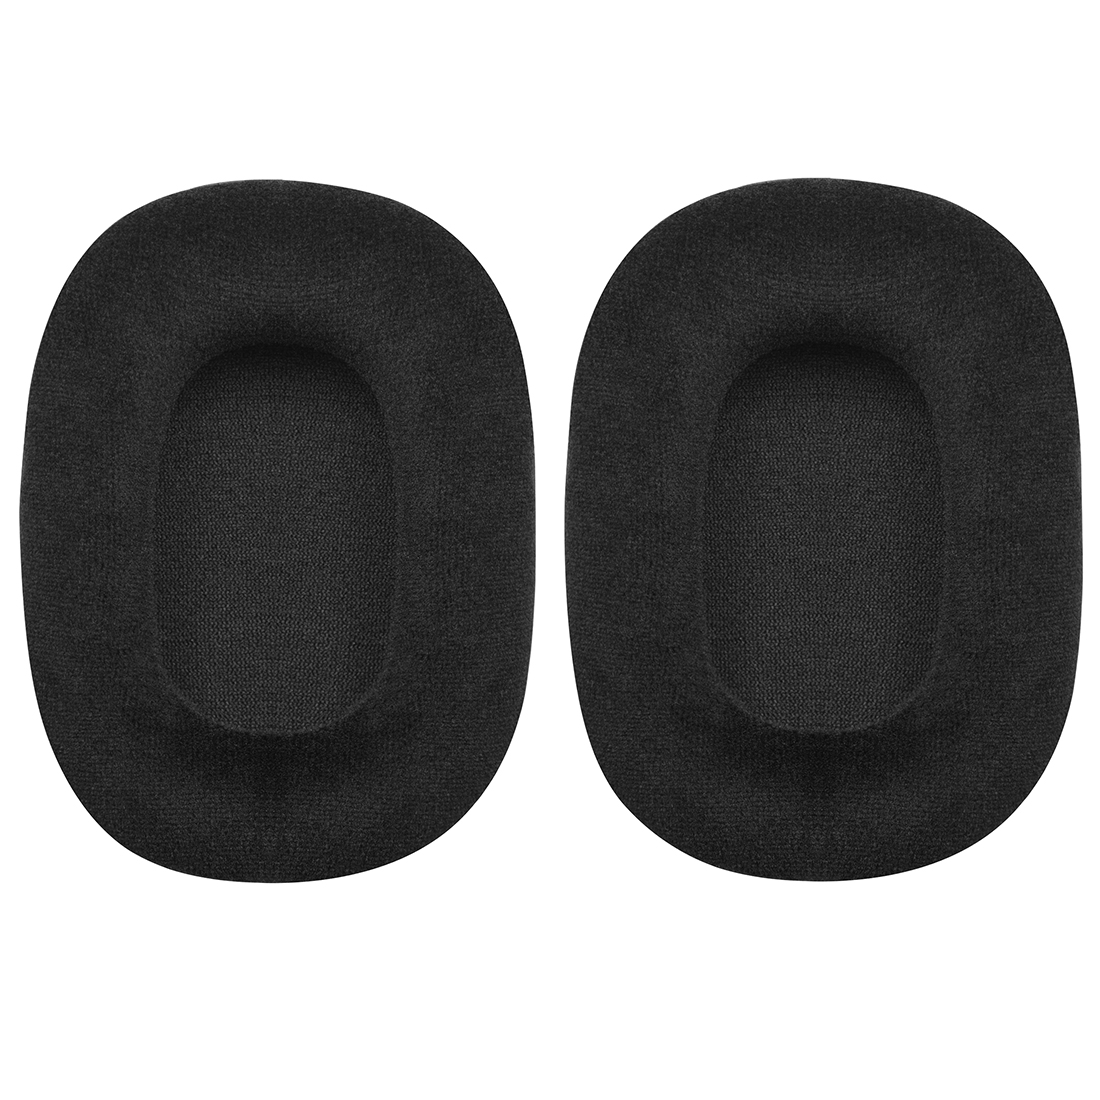 Geekria Replacement Earpad Fit For Turtle Beach Ear Force Recon 50